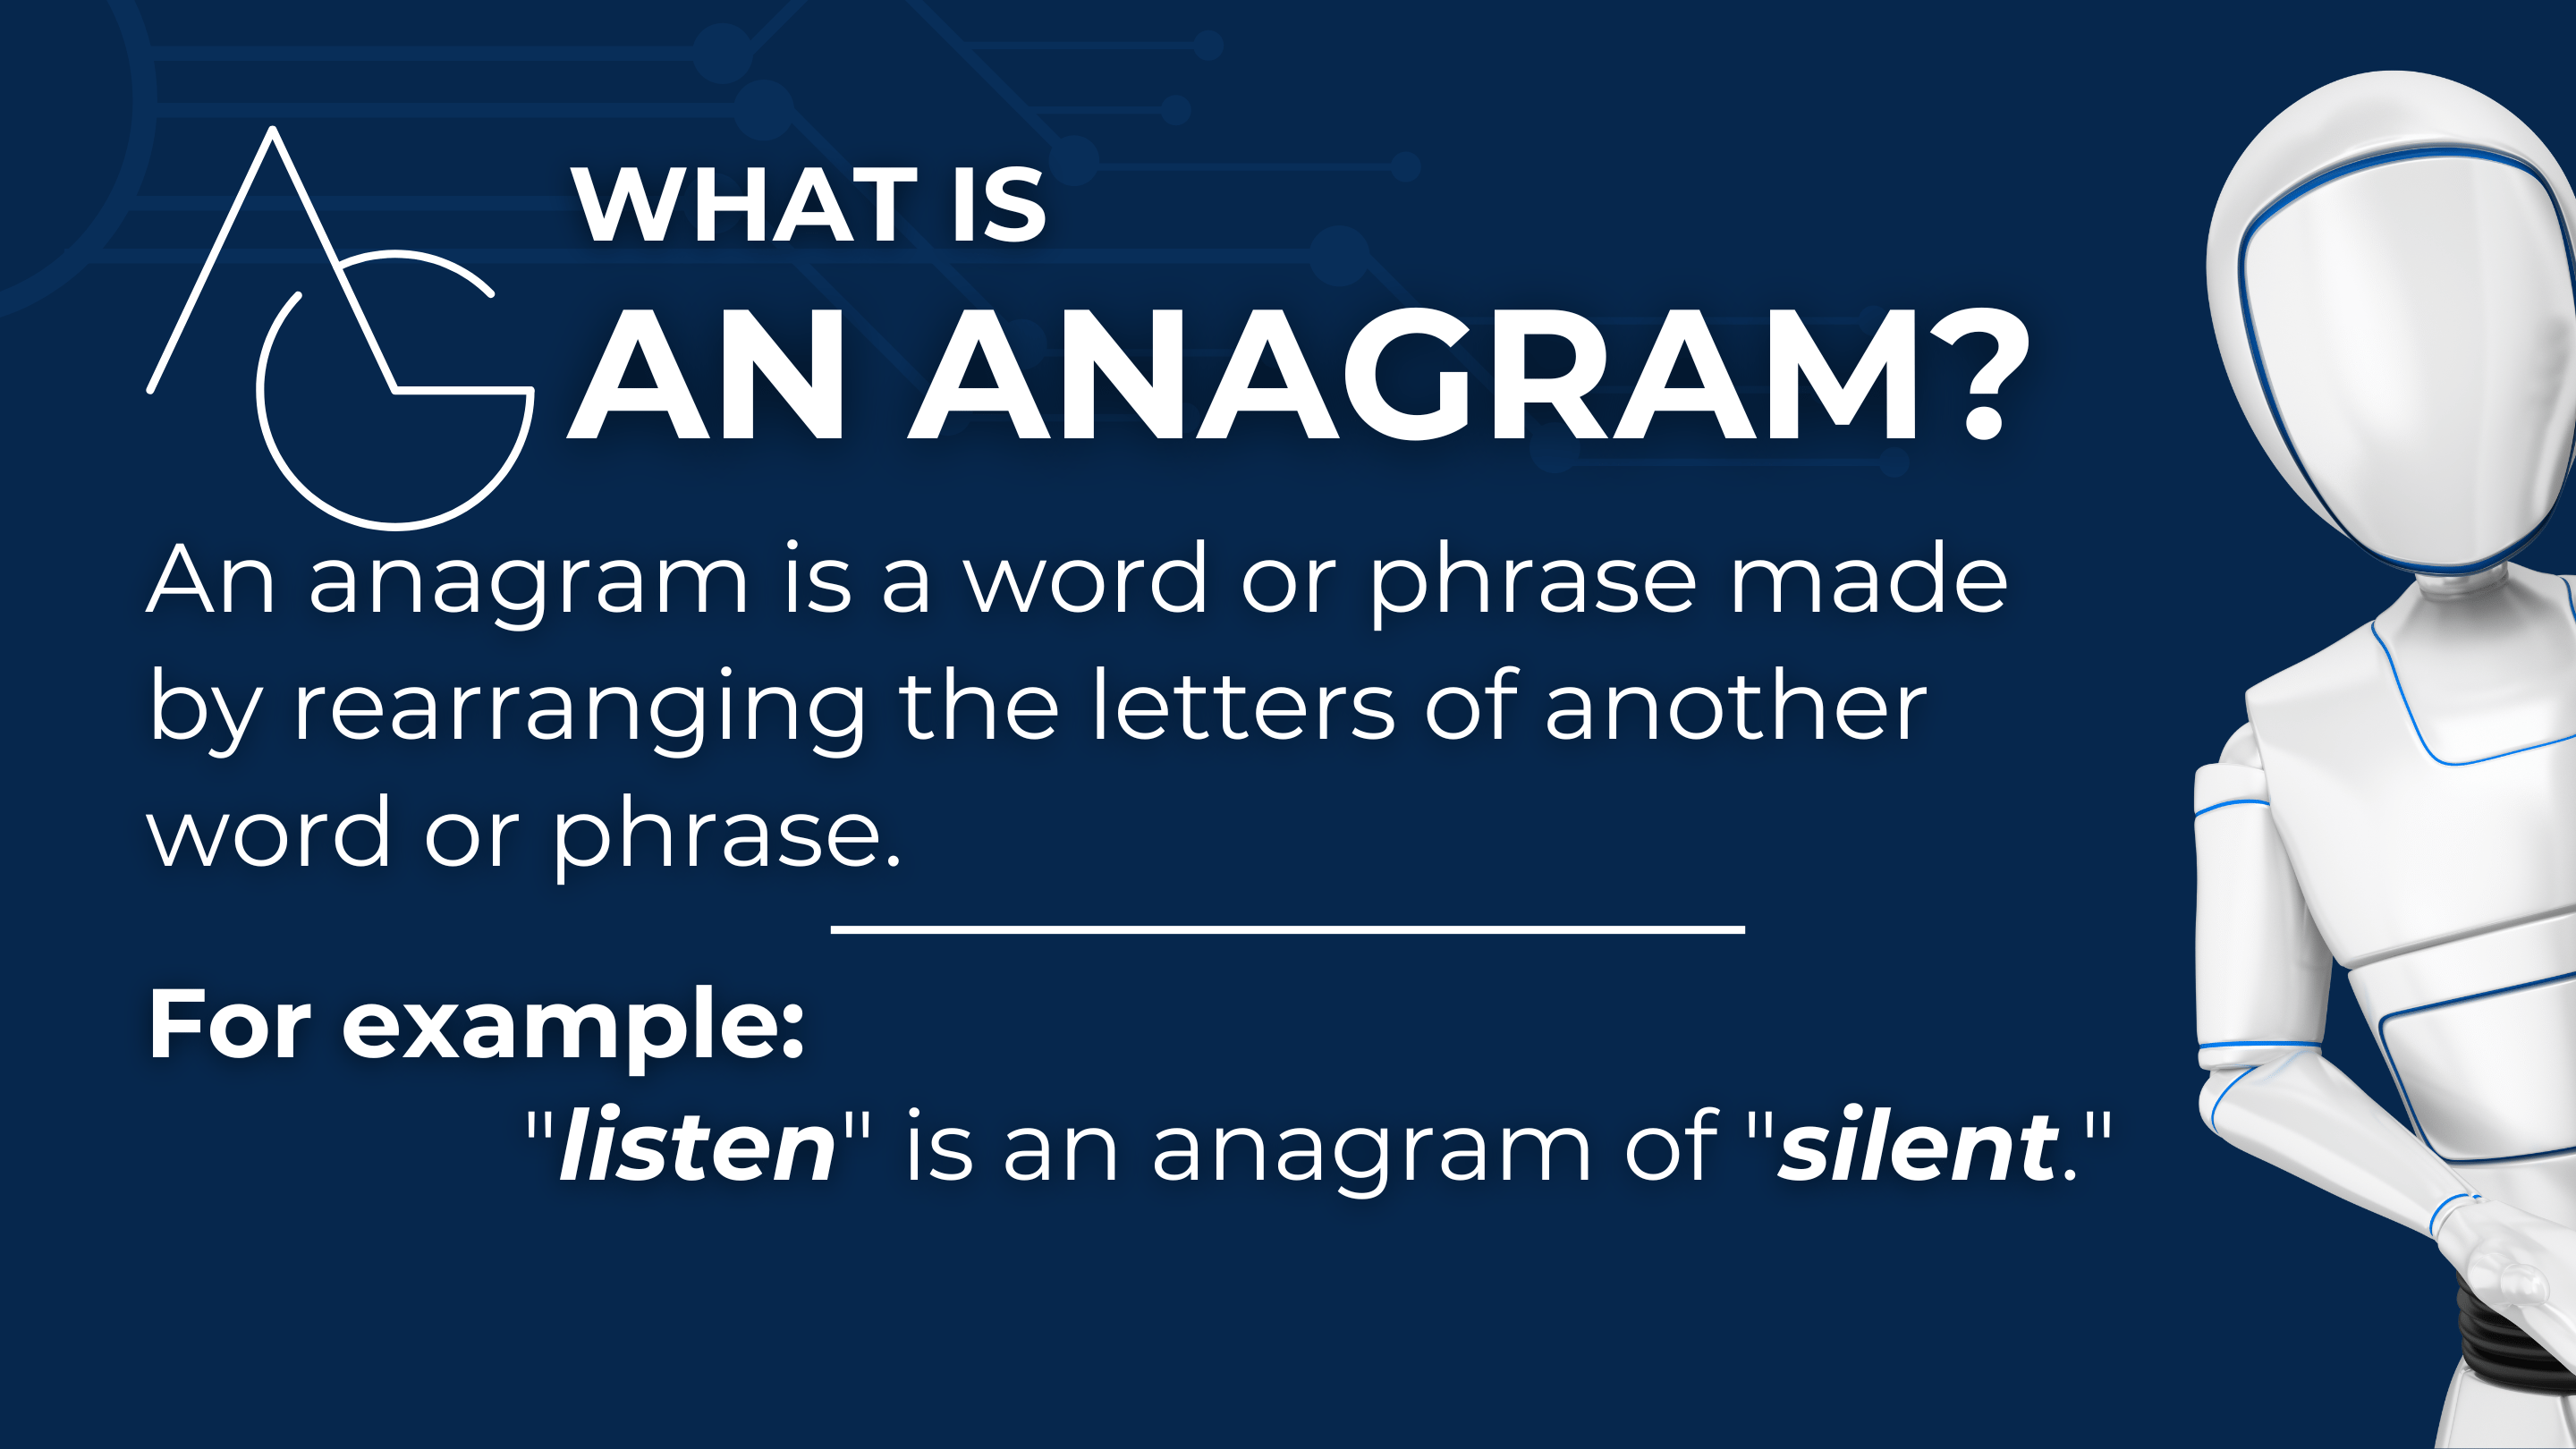 Graphic illustrating the concept of an anagram with text: 'An anagram is formed by rearranging letters to create a new word or phrase. For instance, 'listen' becomes 'silent' in an anagram.